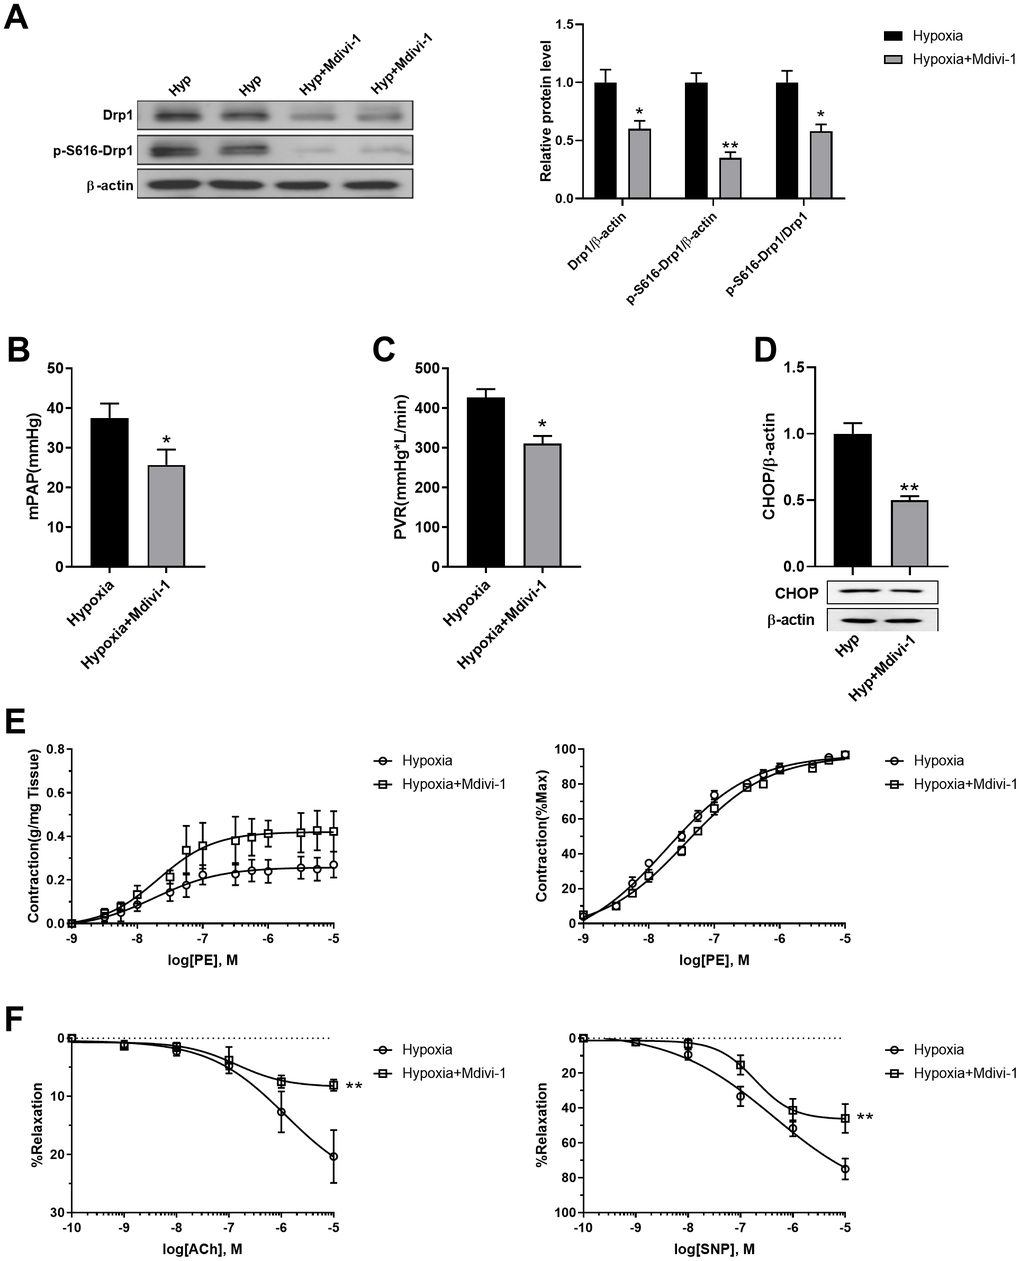 Inhibition of mitochondrial fragmentation using Mdivi-1 improved pulmonary artery smooth muscle function in response to hypoxia in vivo. (A) Mdivi-1 treatment decreased Drp1 and Drp1 phosphorylation at serine 616 in PASMCs of hypoxic rats. Twenty micrograms of protein was loaded in each lane. (B, C) Mdivi-1 treatment decreased both mPAP and PVR in hypoxia rats. (D) Mdivi-1 treatment deceased ER stress as detected by CHOP in isolated endothelium-denuded pulmonary arteries from hypoxic rats. Twenty micrograms of protein was loaded in each lane. (E, F) Mdivi-1 treatment improved PE-induced vasoconstriction (E) and ACh/SNP-induced vasodilation (F) in isolated pulmonary arteries from hypoxic rats. *, p p 